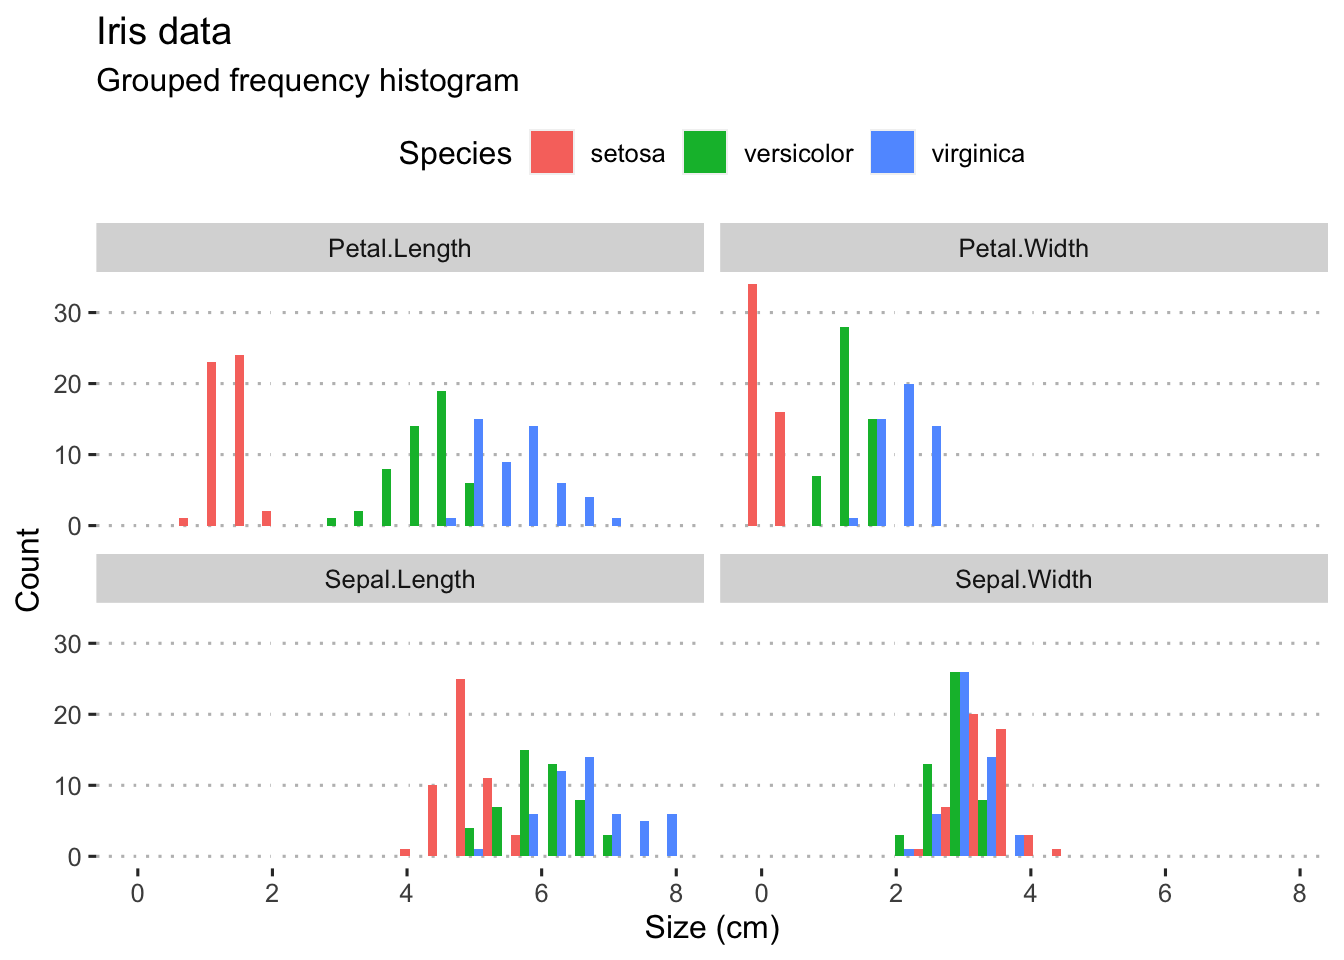 Panelled grouped histograms for the four Iris variables.